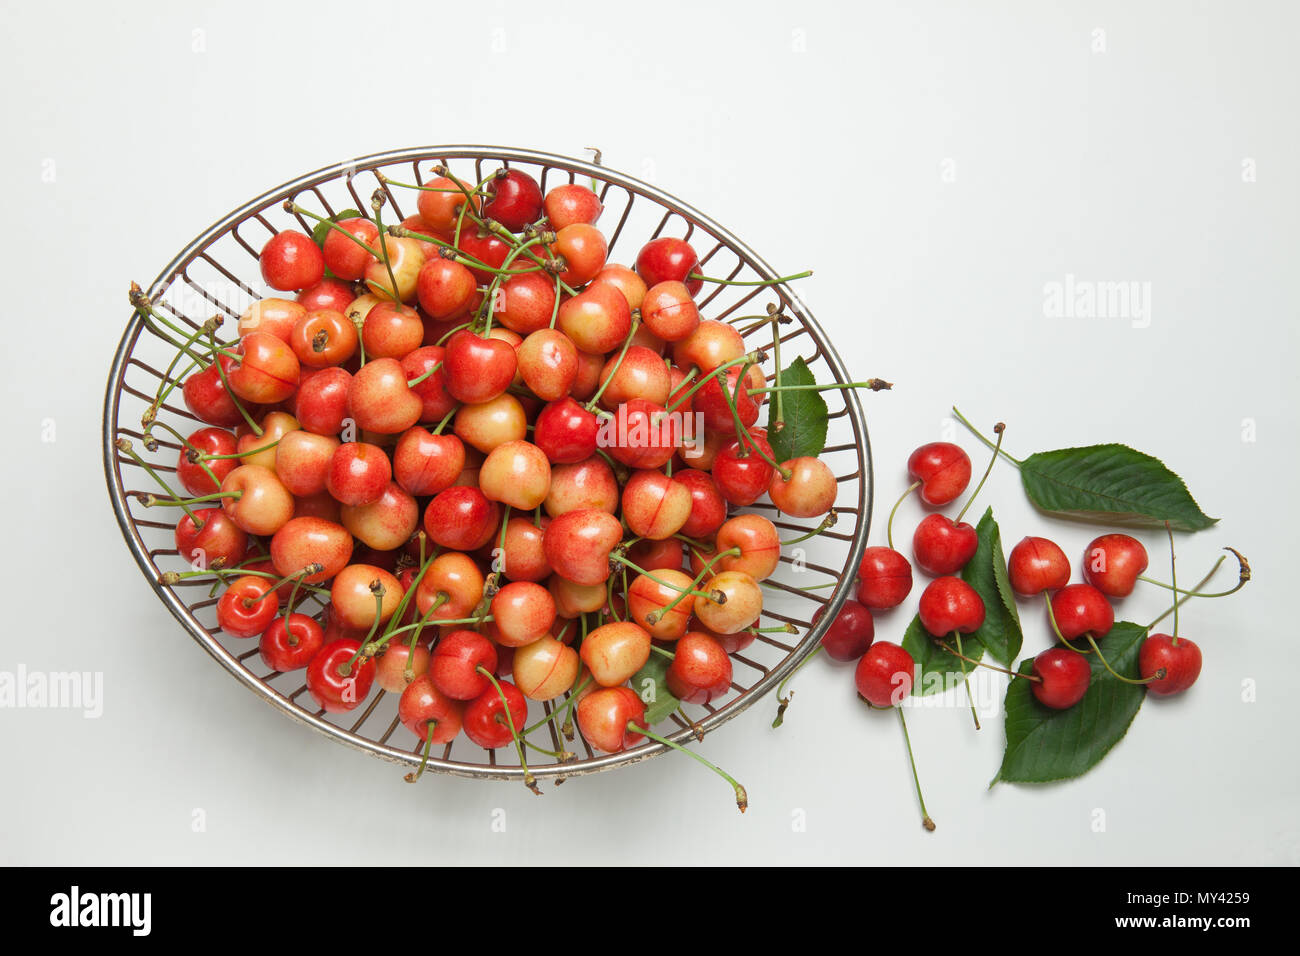 cherries in a metal basket view from above Stock Photo